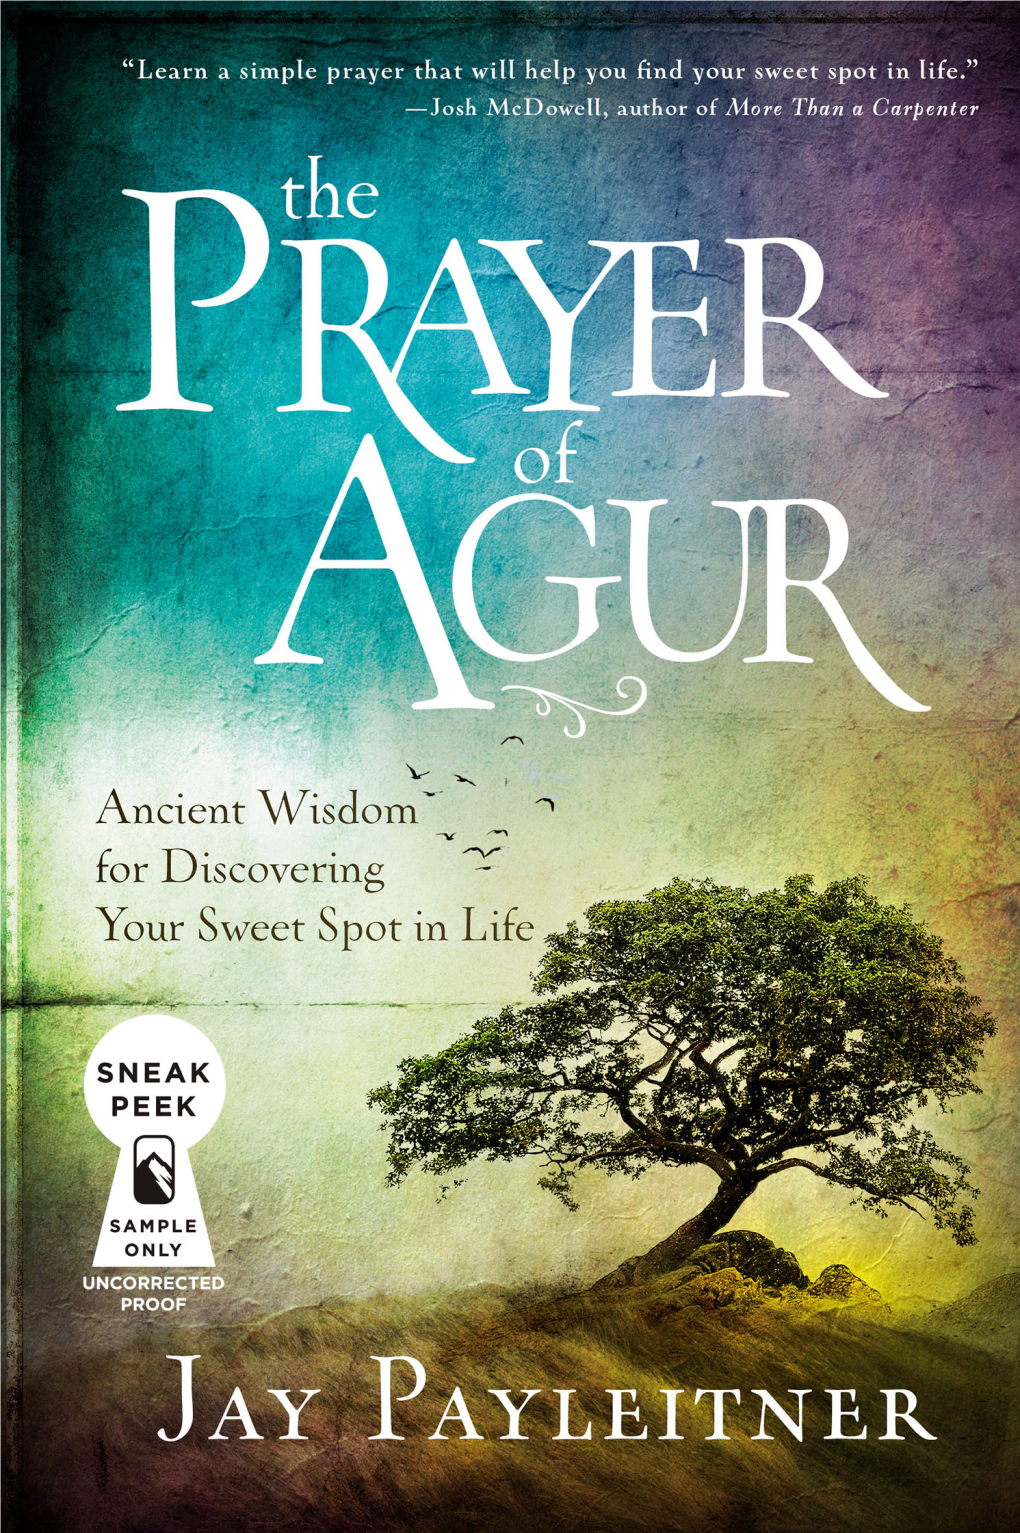 Read the First Chapter of the Prayer of Agur